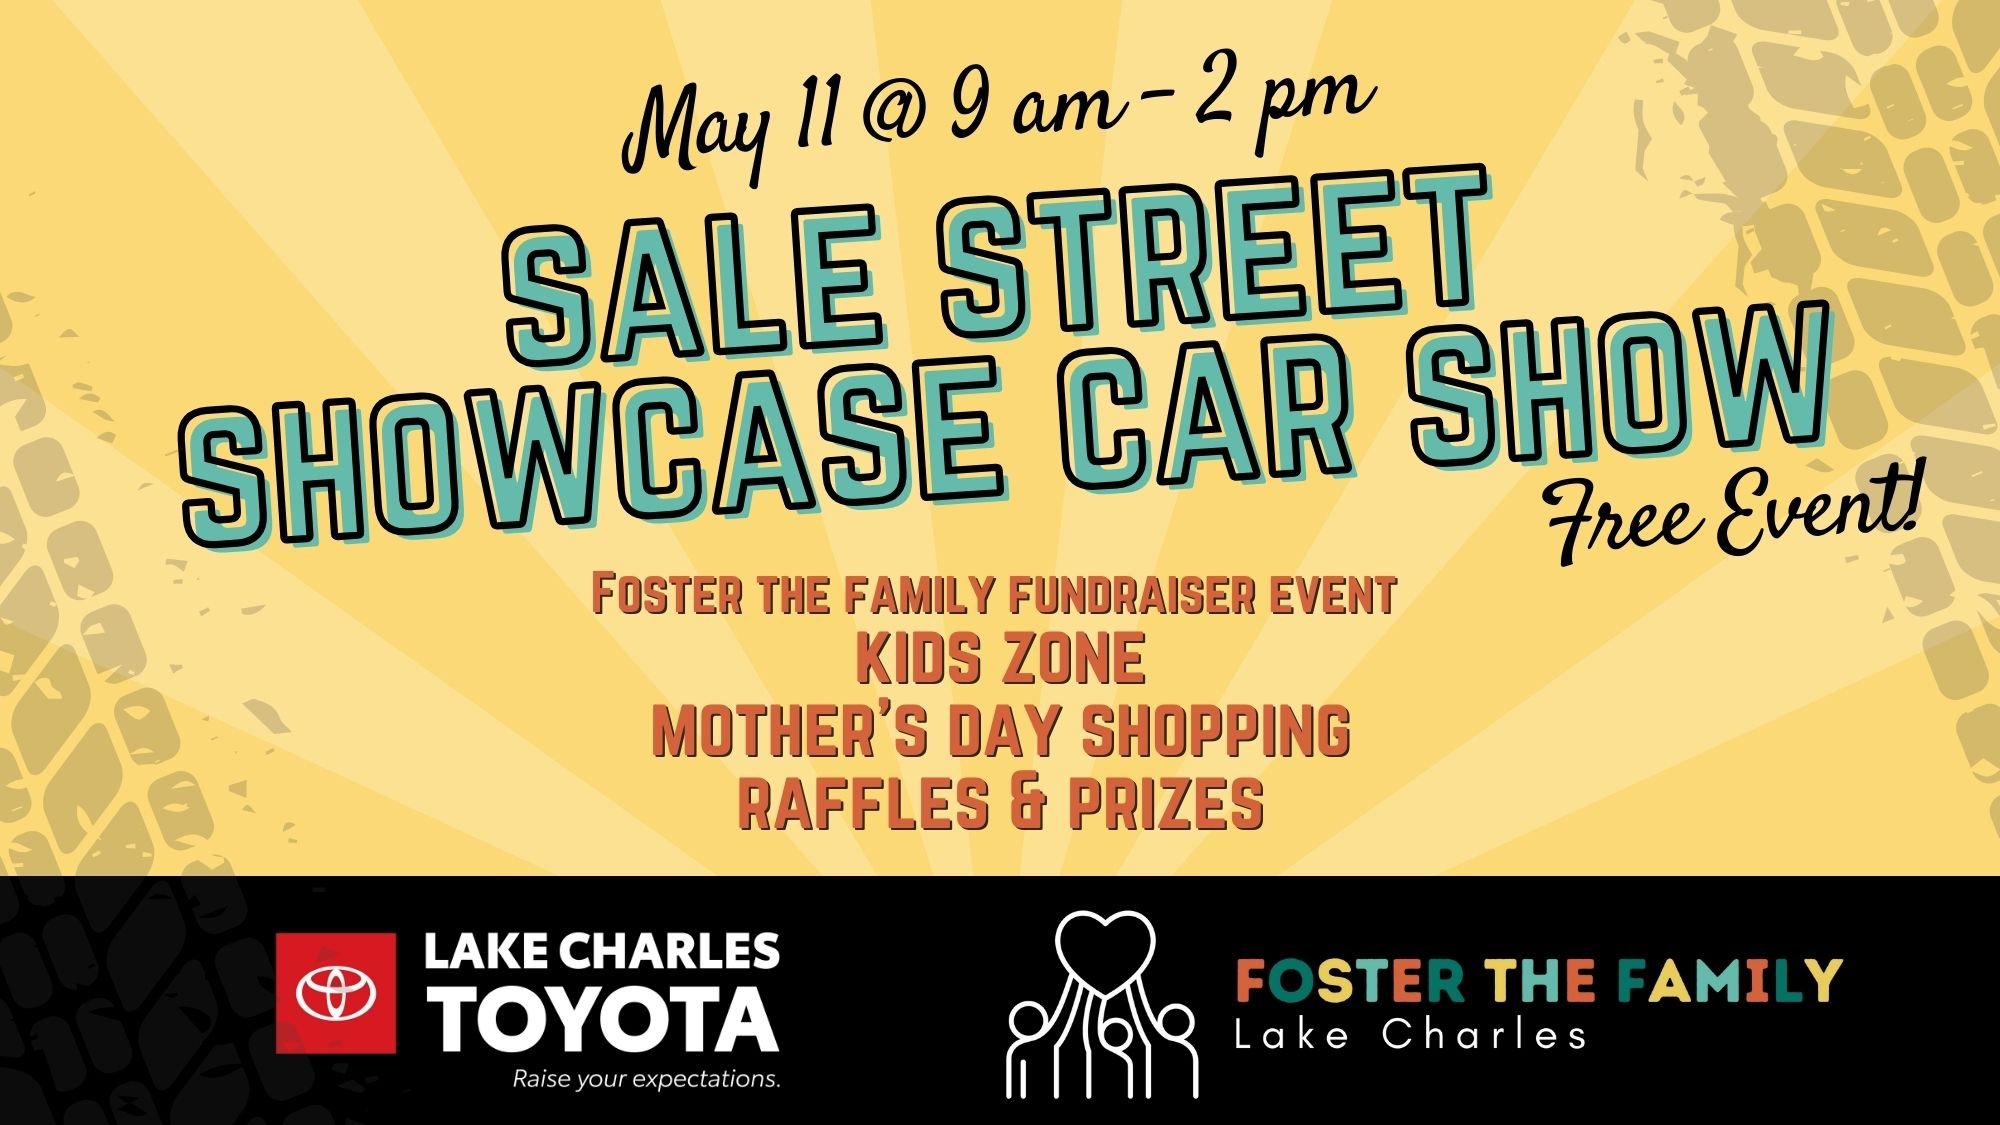 We could not be more 🤩 EXCITED 🤩 for the first Sale Street Showcase Car Show this Saturday! We've got some awesome cars lined up, tons of Mother's Day shopping, so much fun for the kiddos, Hotwheels spin to win, amazing raffles and door prizes, mer